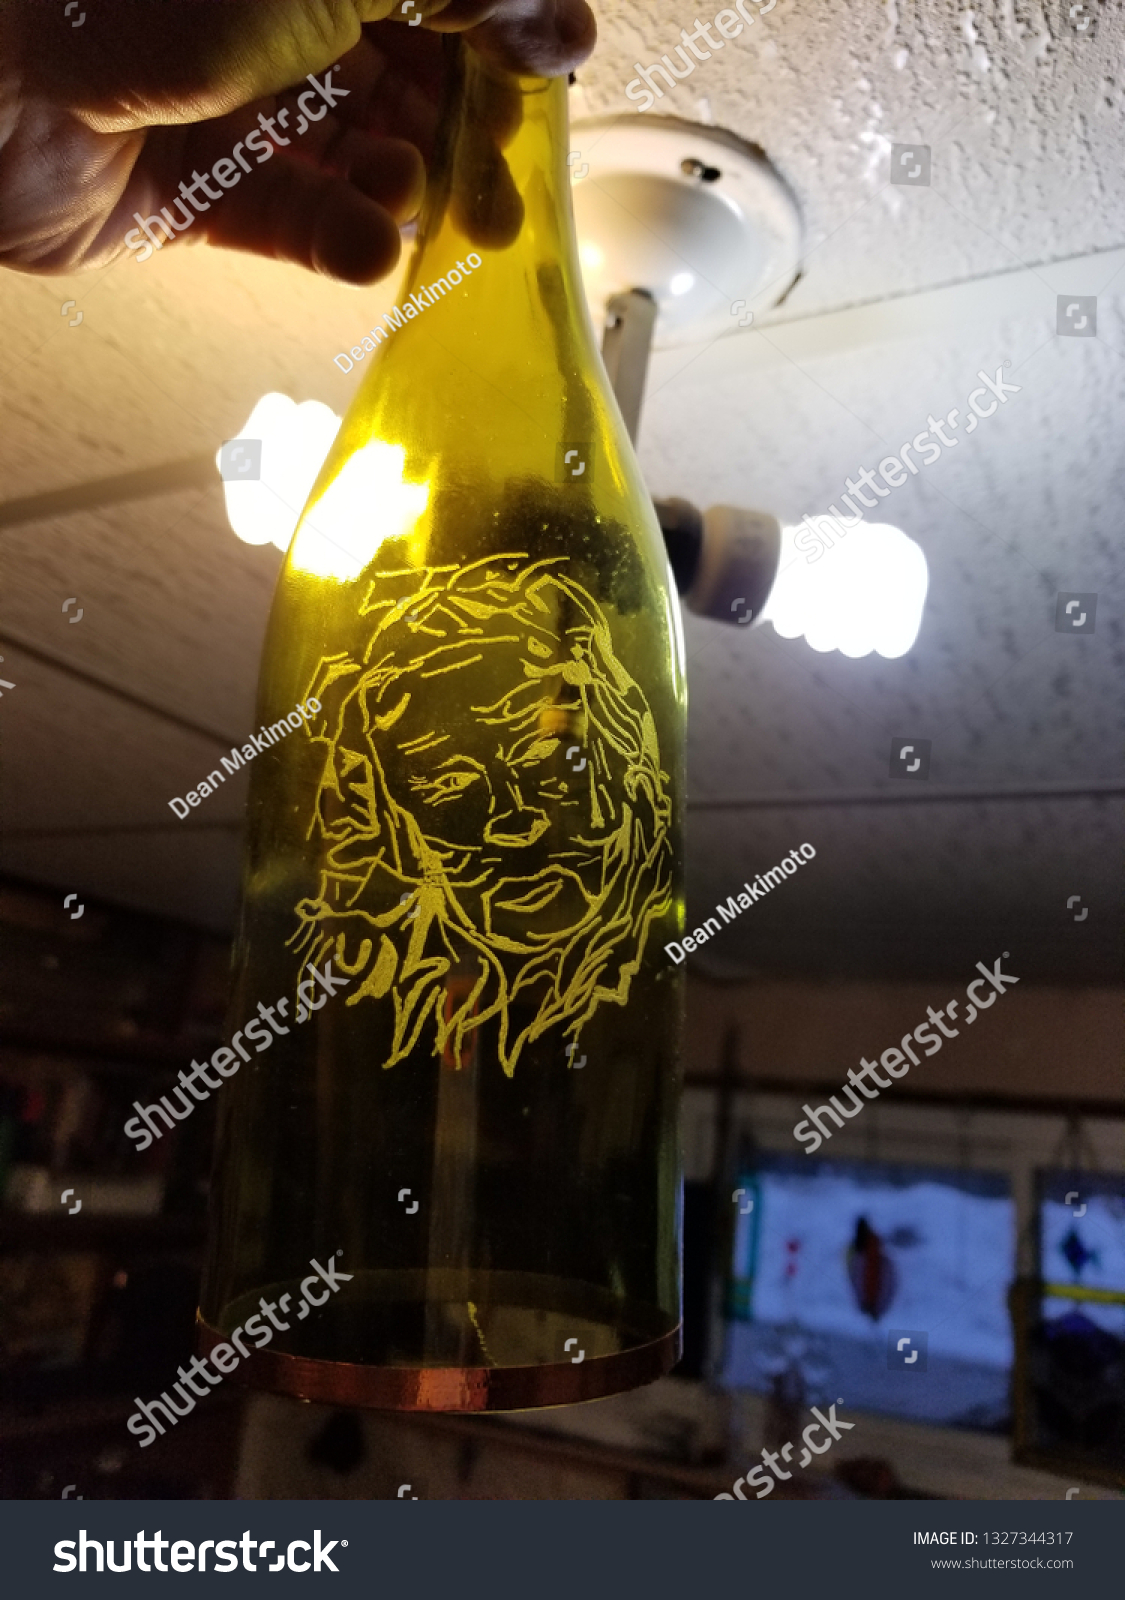 glass etching, wine bottle, lamps  #1327344317